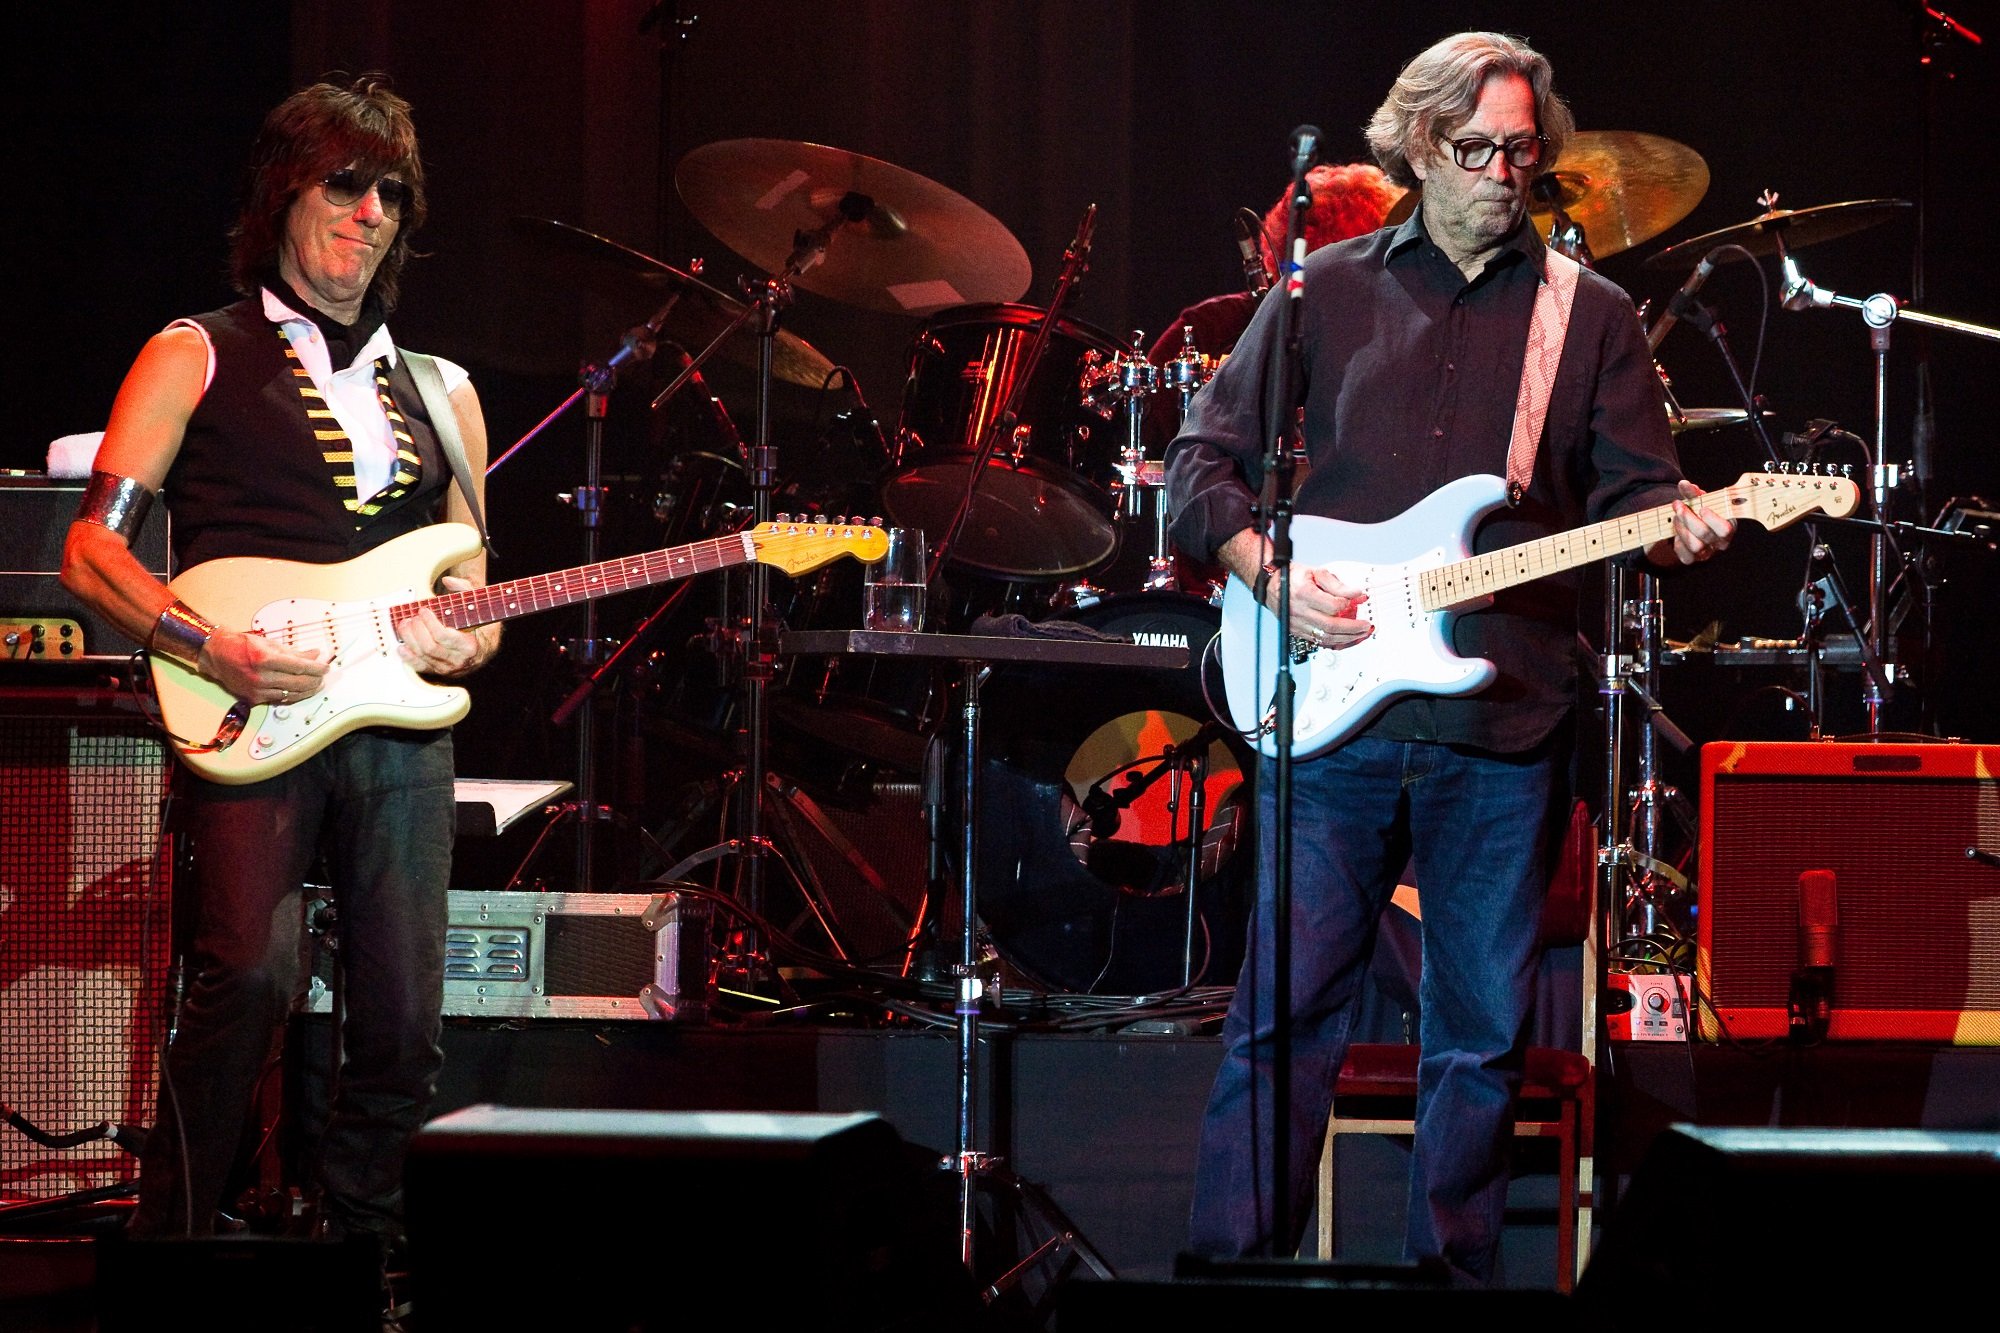 Jeff Beck and Eric Clapton play guitar onstage together